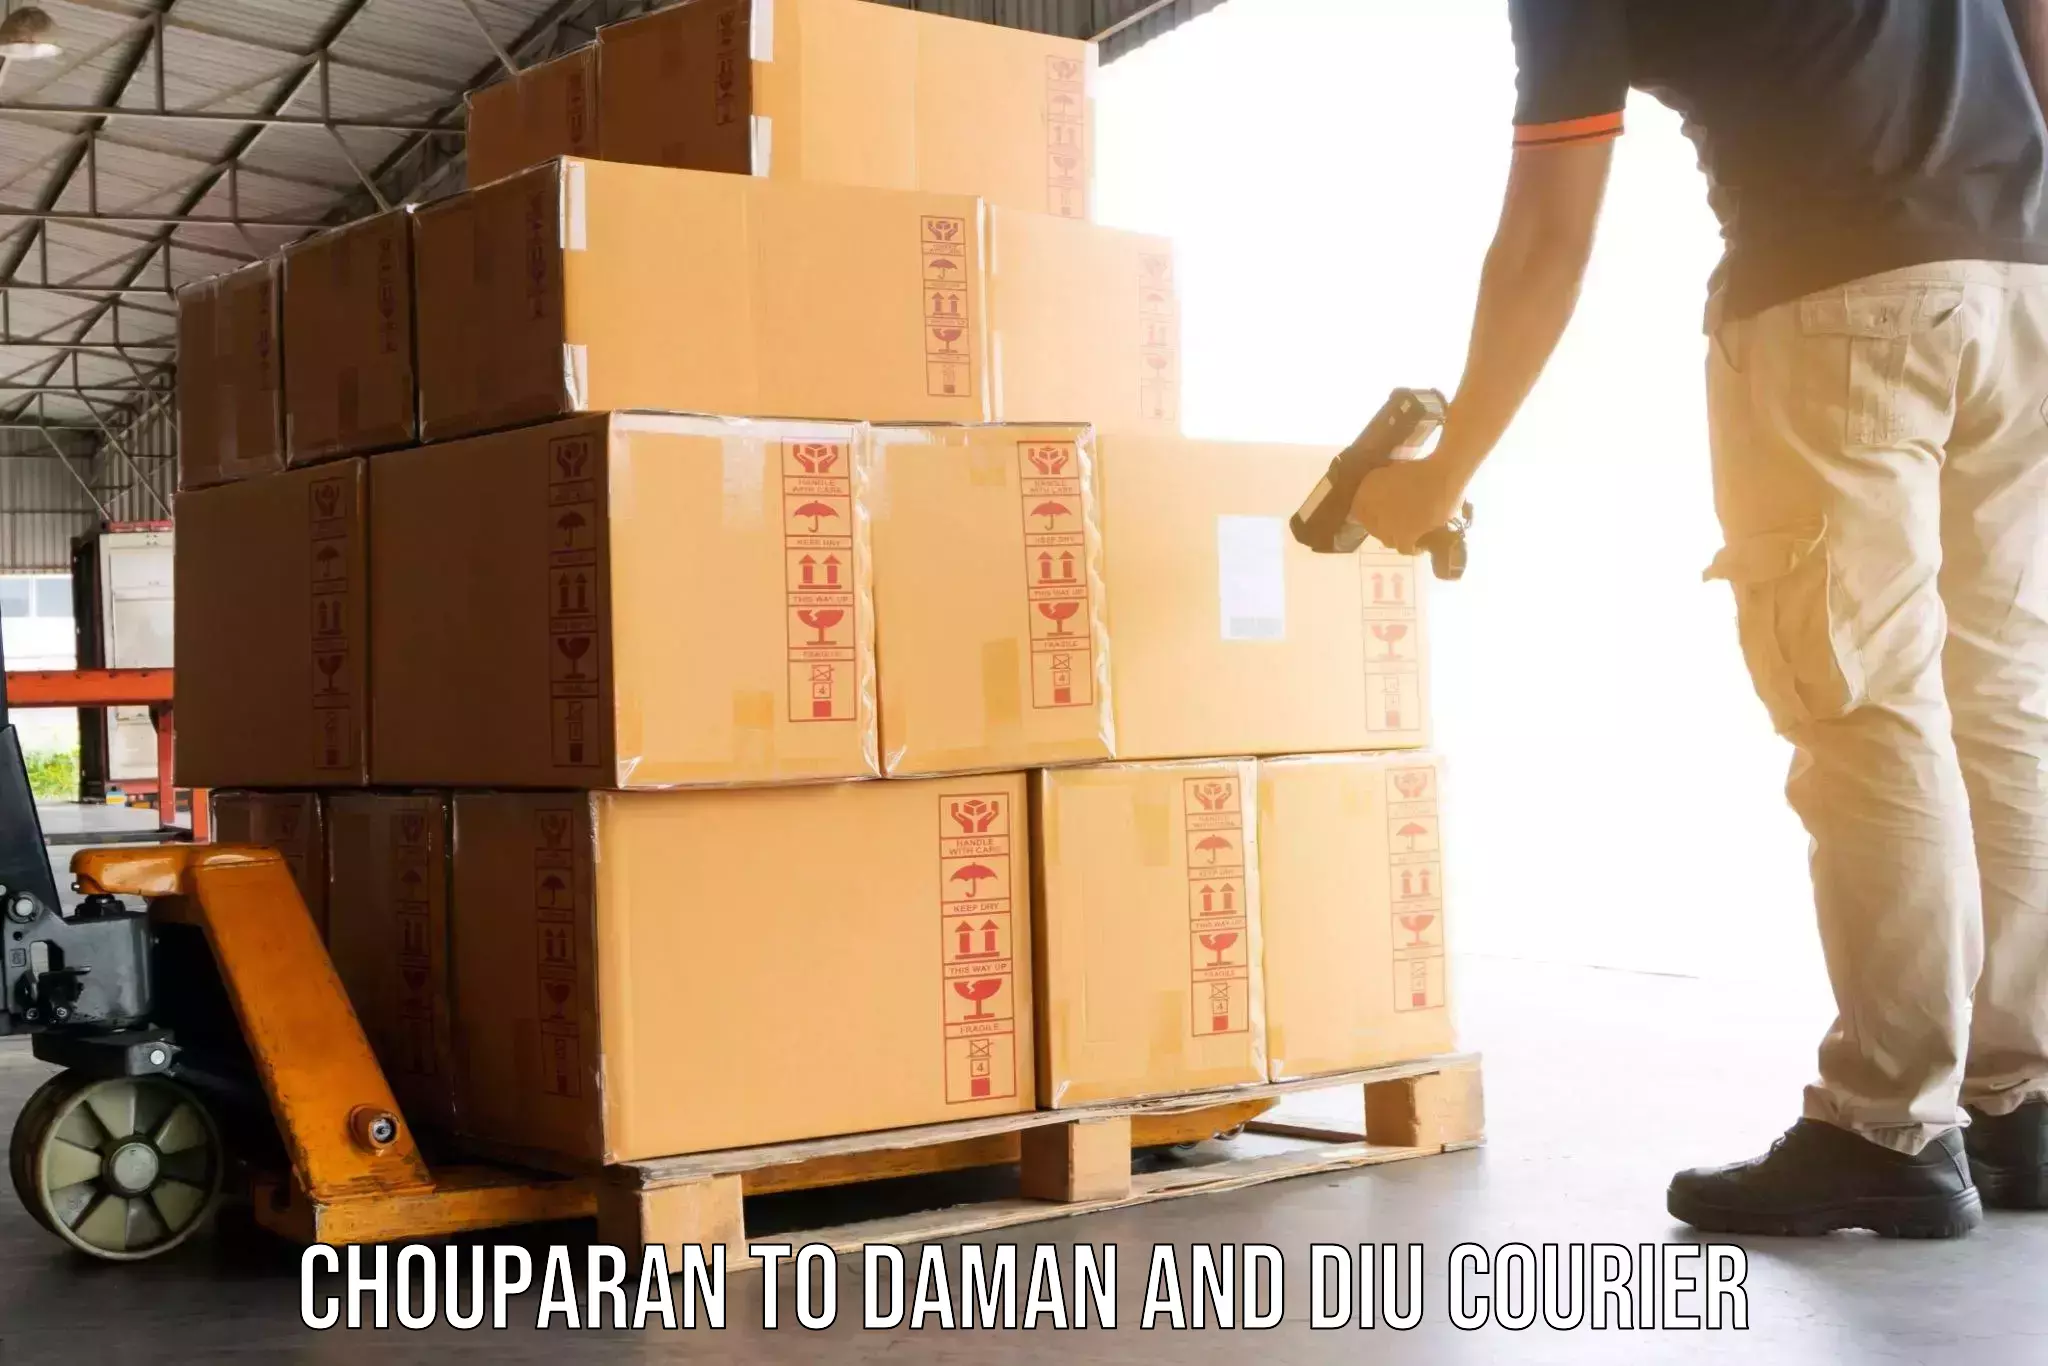 Furniture delivery service Chouparan to Daman